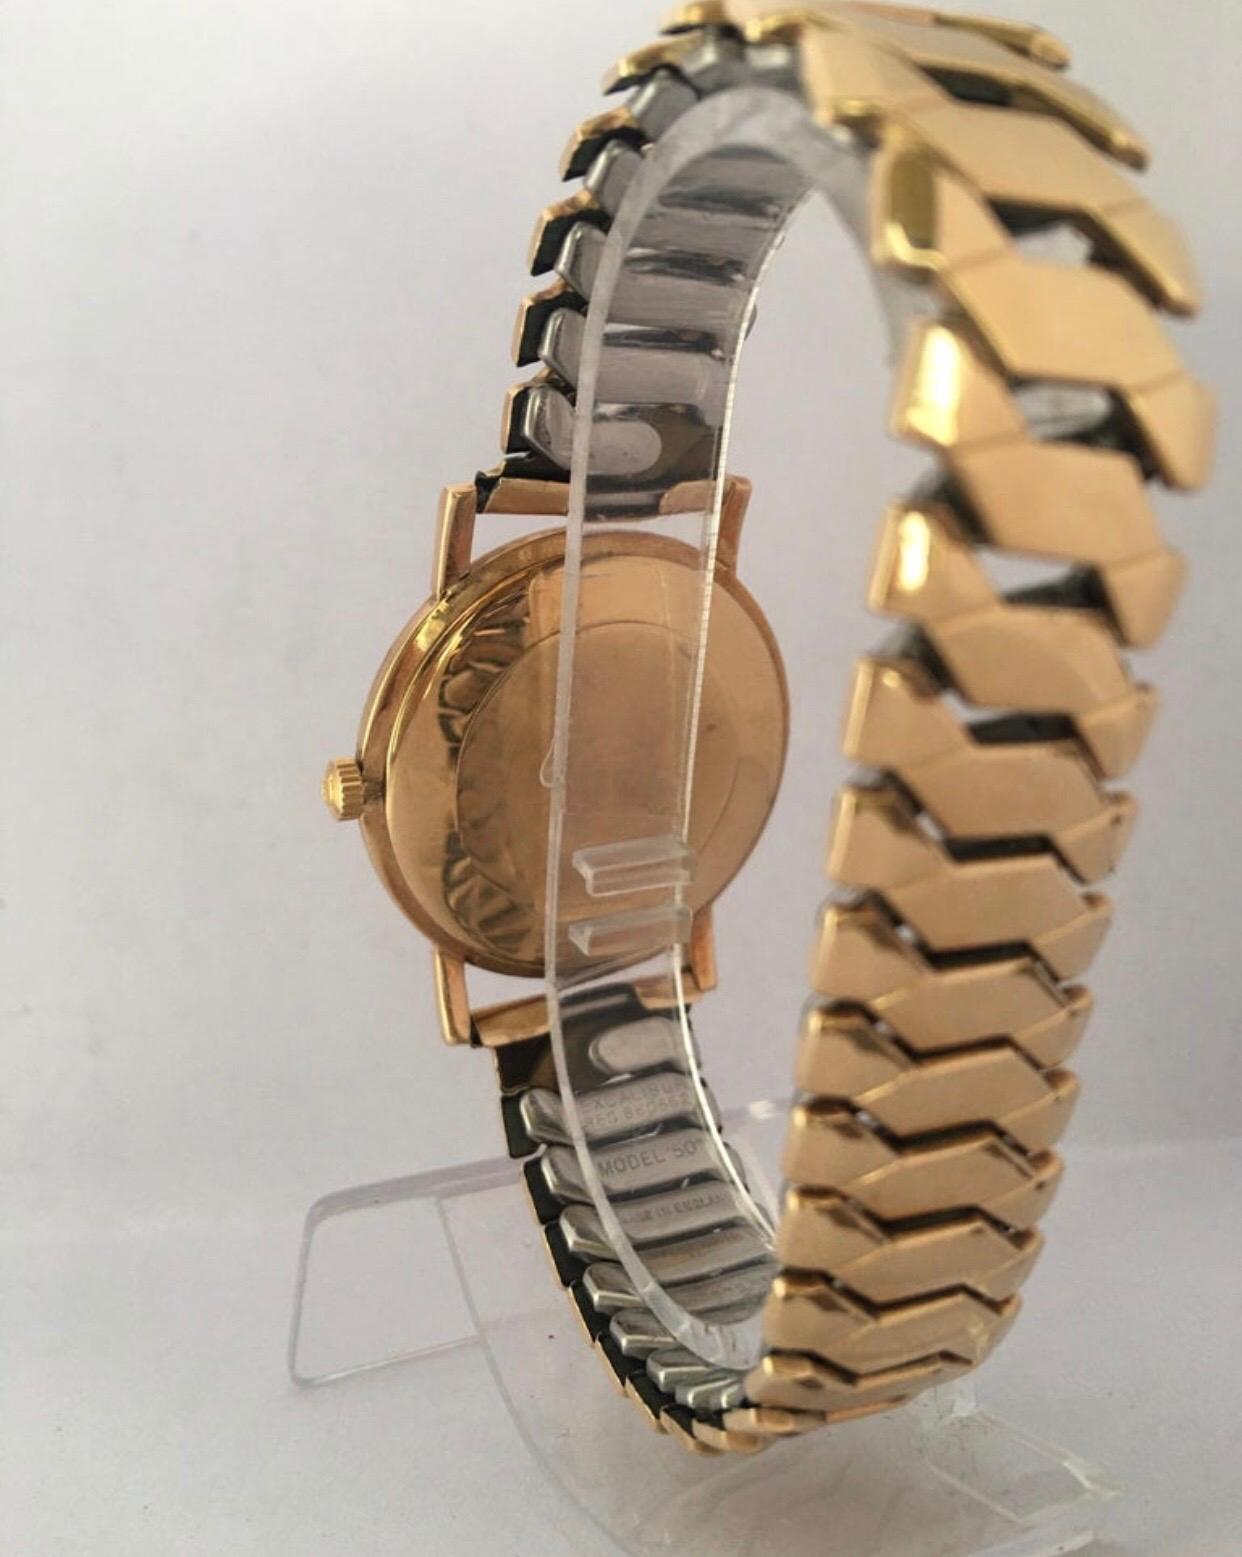 9 Karat Gold and Rolled Gold Bracelet 1960s Omega Mechanical Watch In Good Condition For Sale In Carlisle, GB